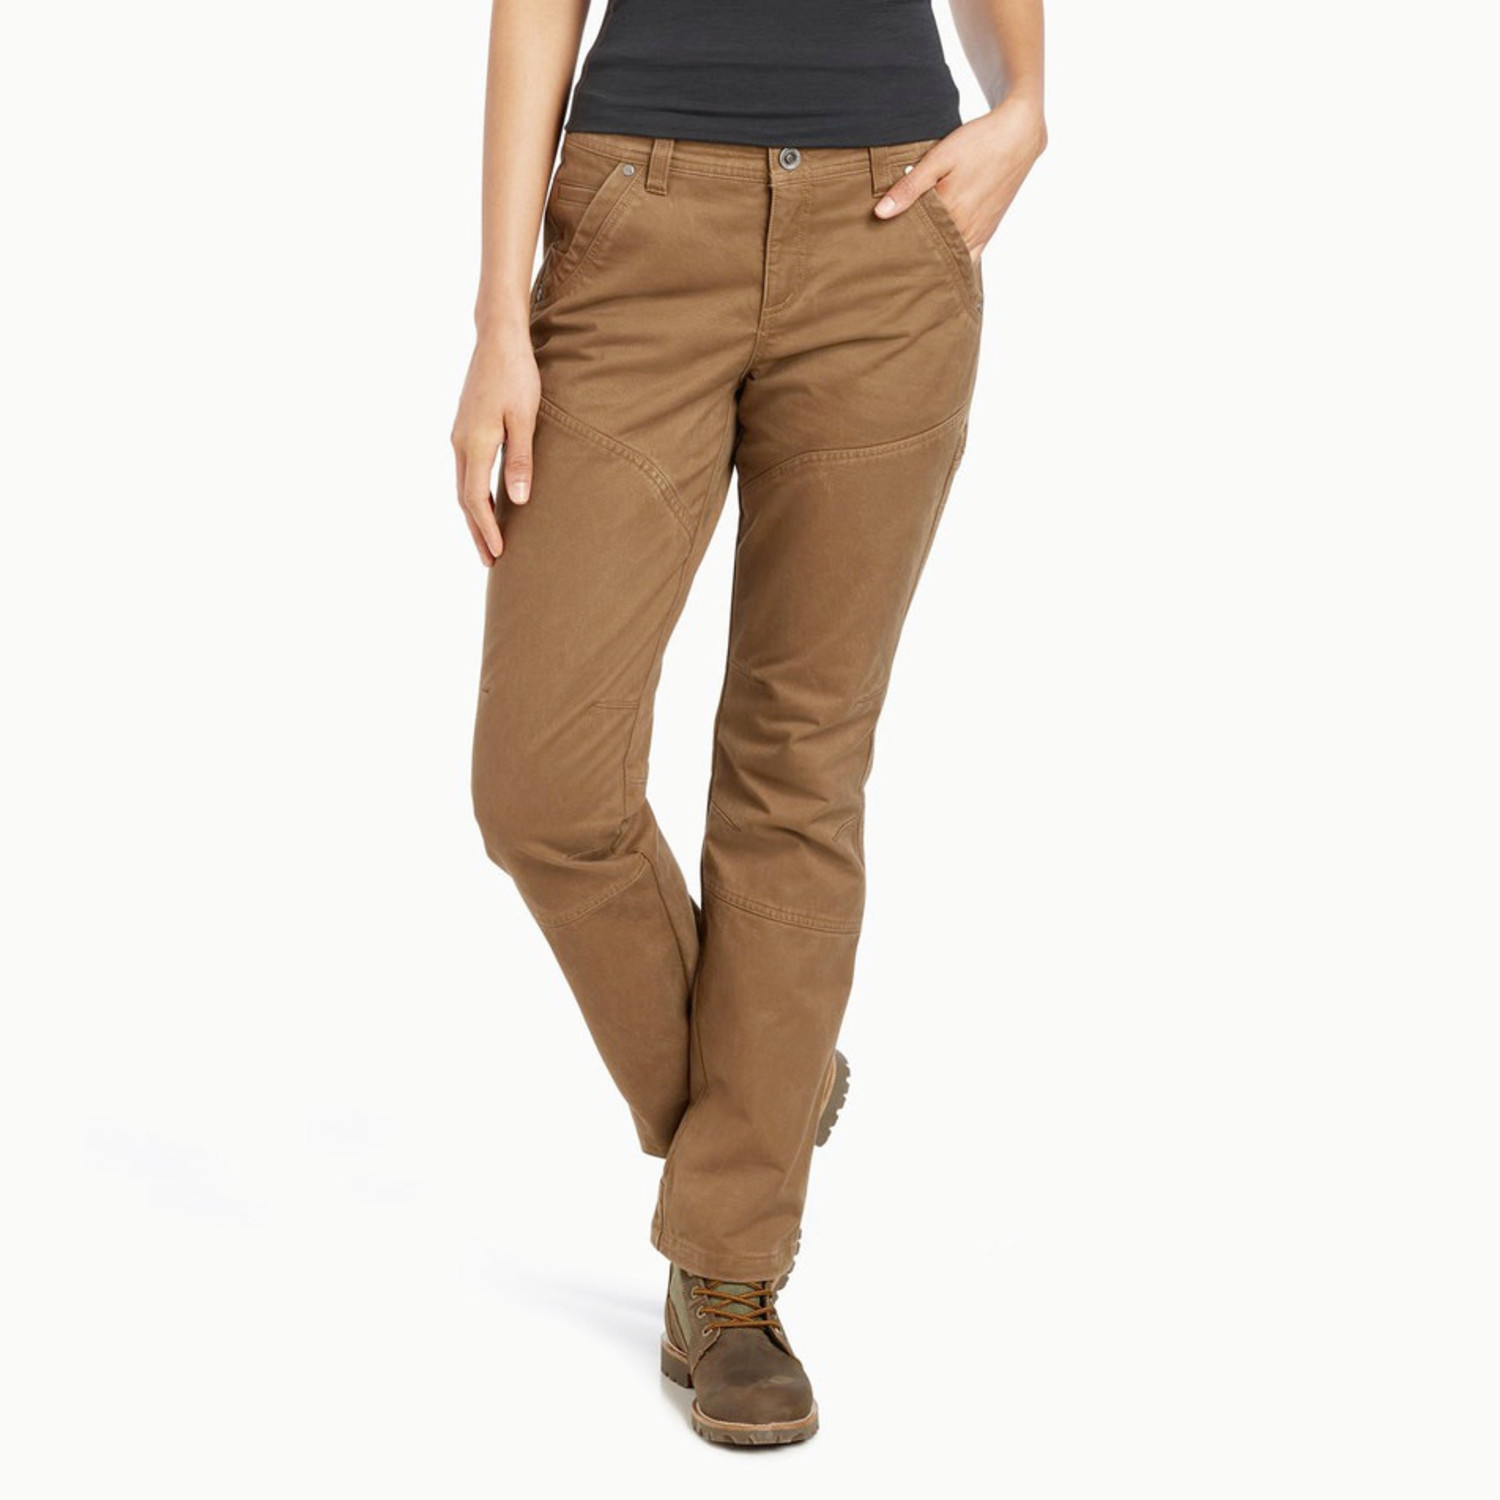 KUHL Women's Rydr Pant - True Outdoors